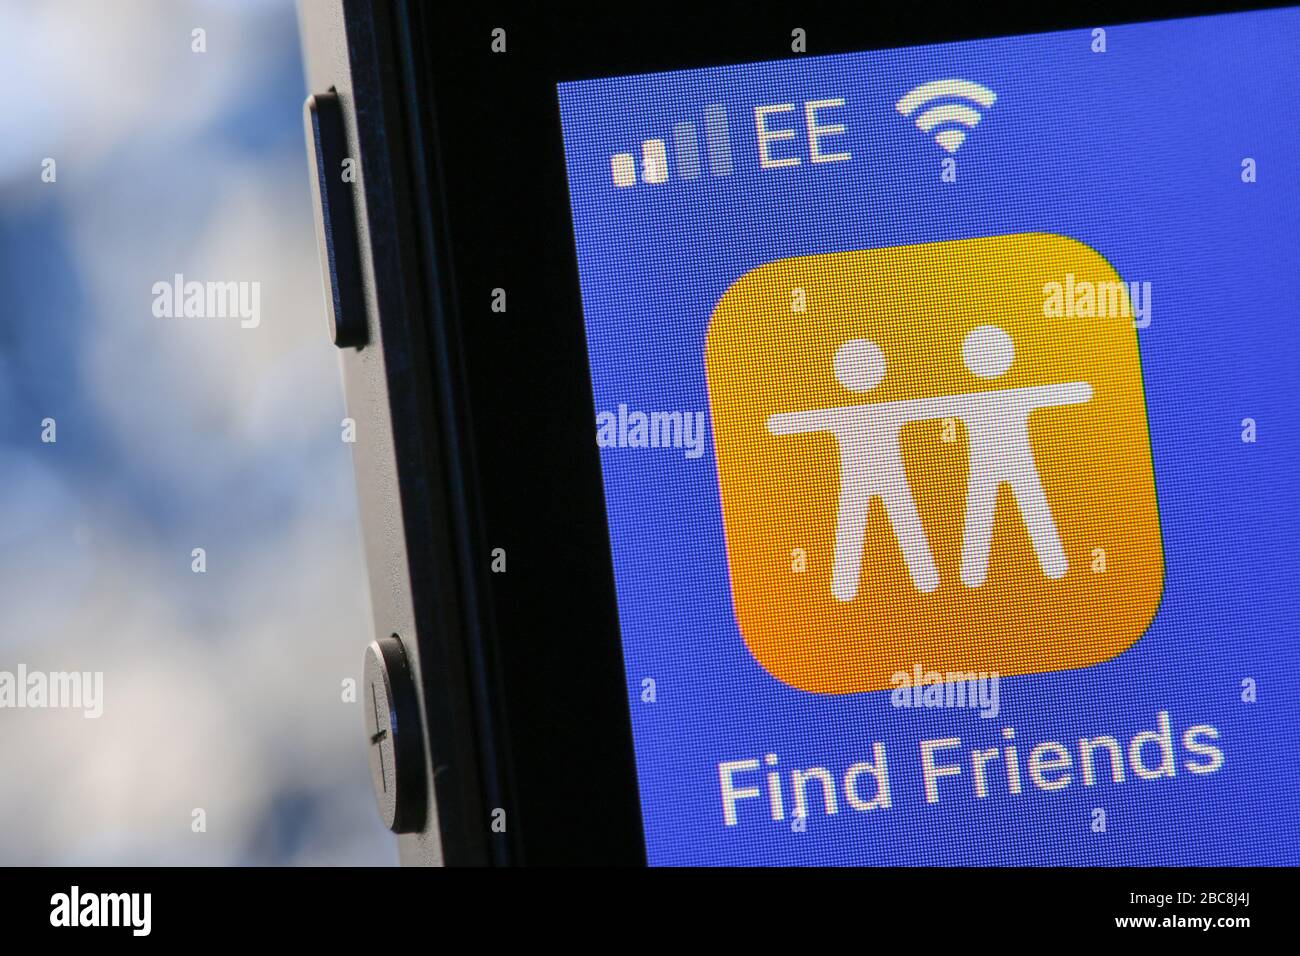 Find Friends app on an iPhone. Stock Photo